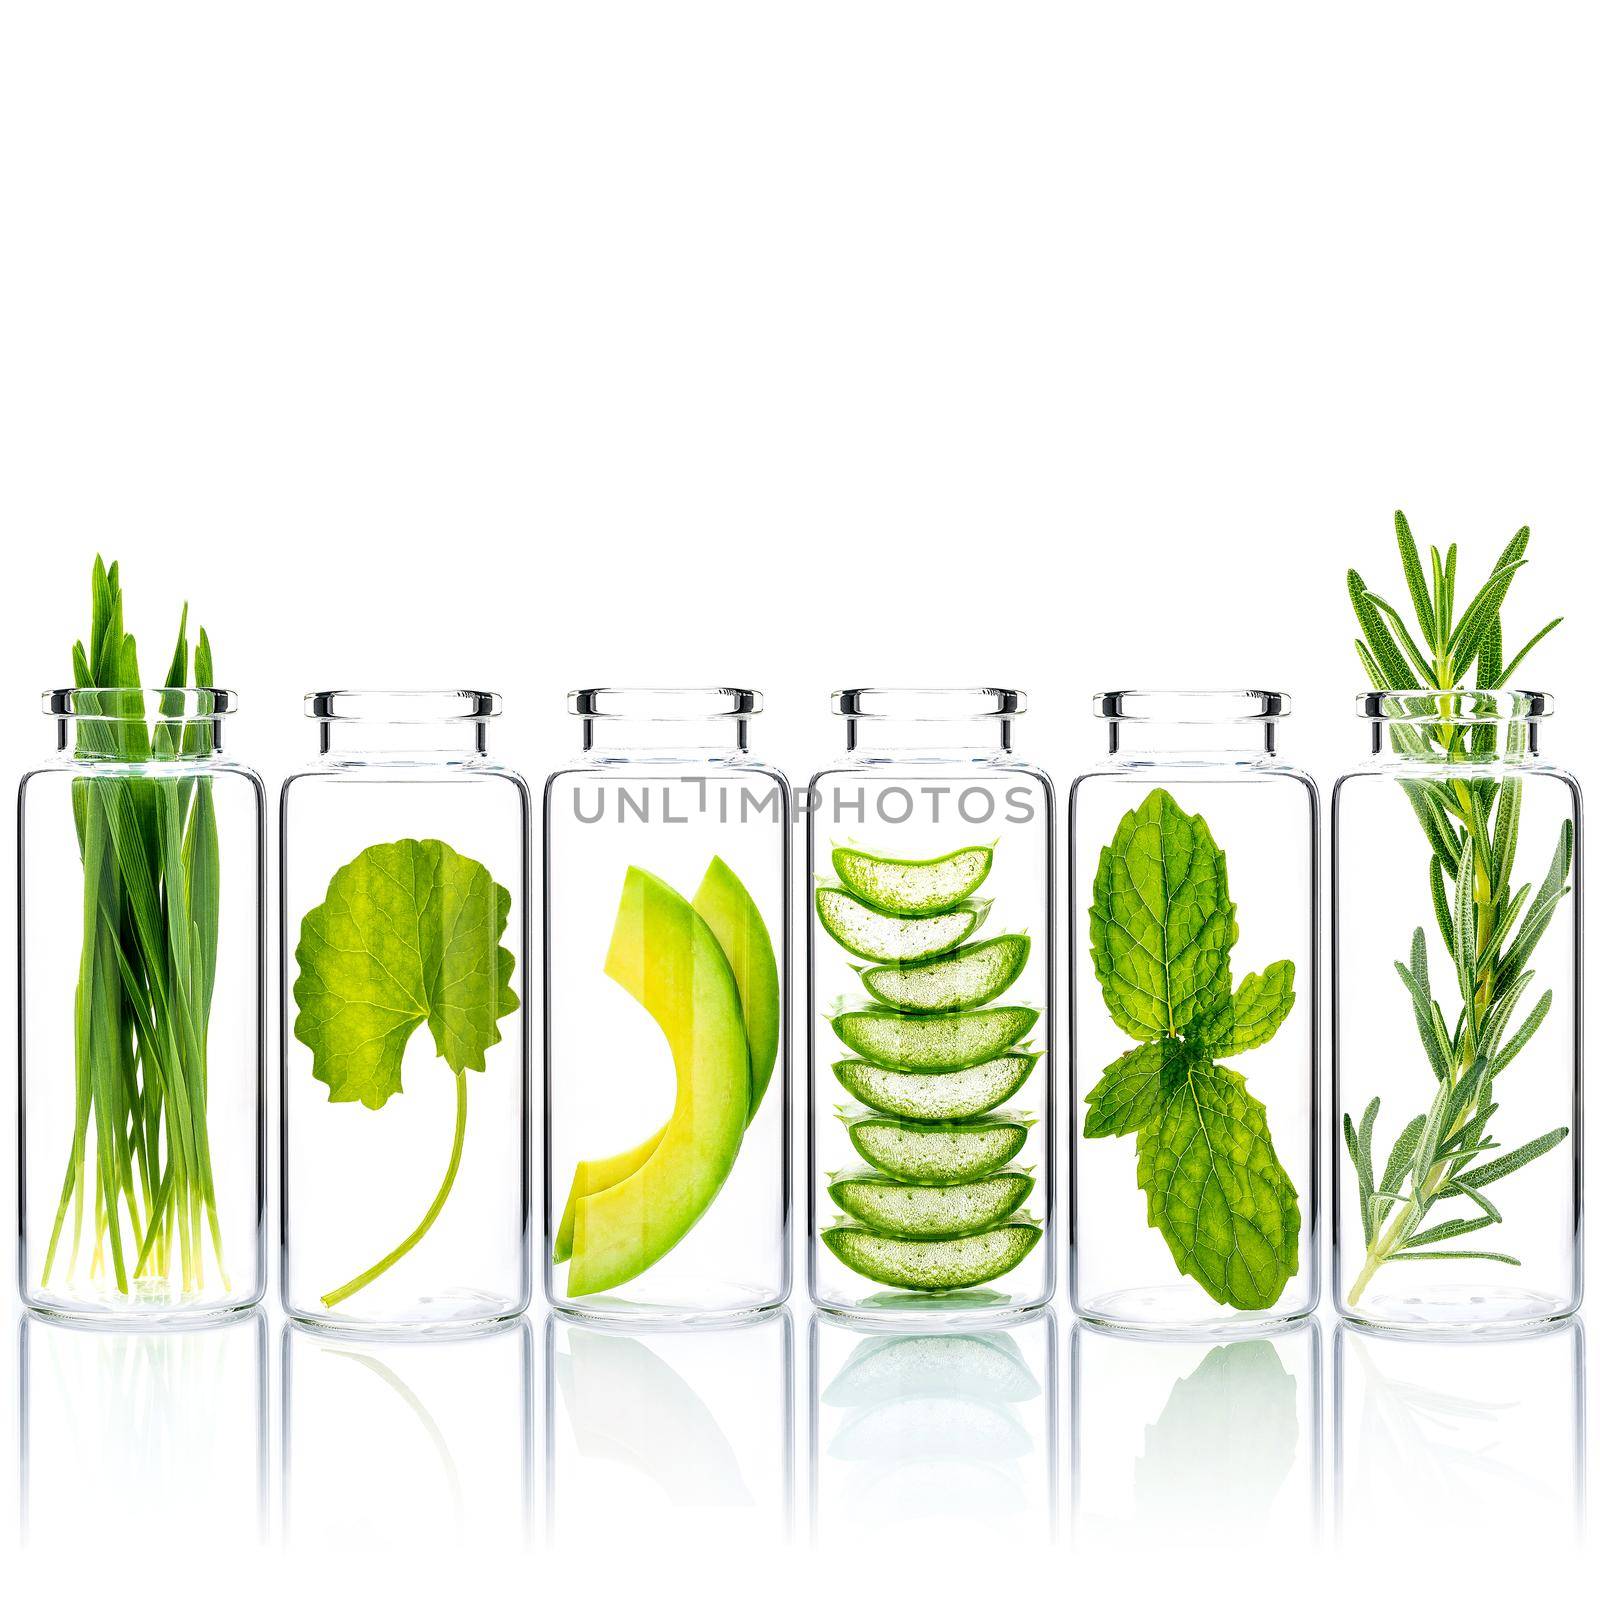 Homemade skin care with natural ingredients wheat grass ,avocado ,aloe vera ,mint leave ,centella asiatica and rosemary in glass bottles isolate on white background. by kerdkanno